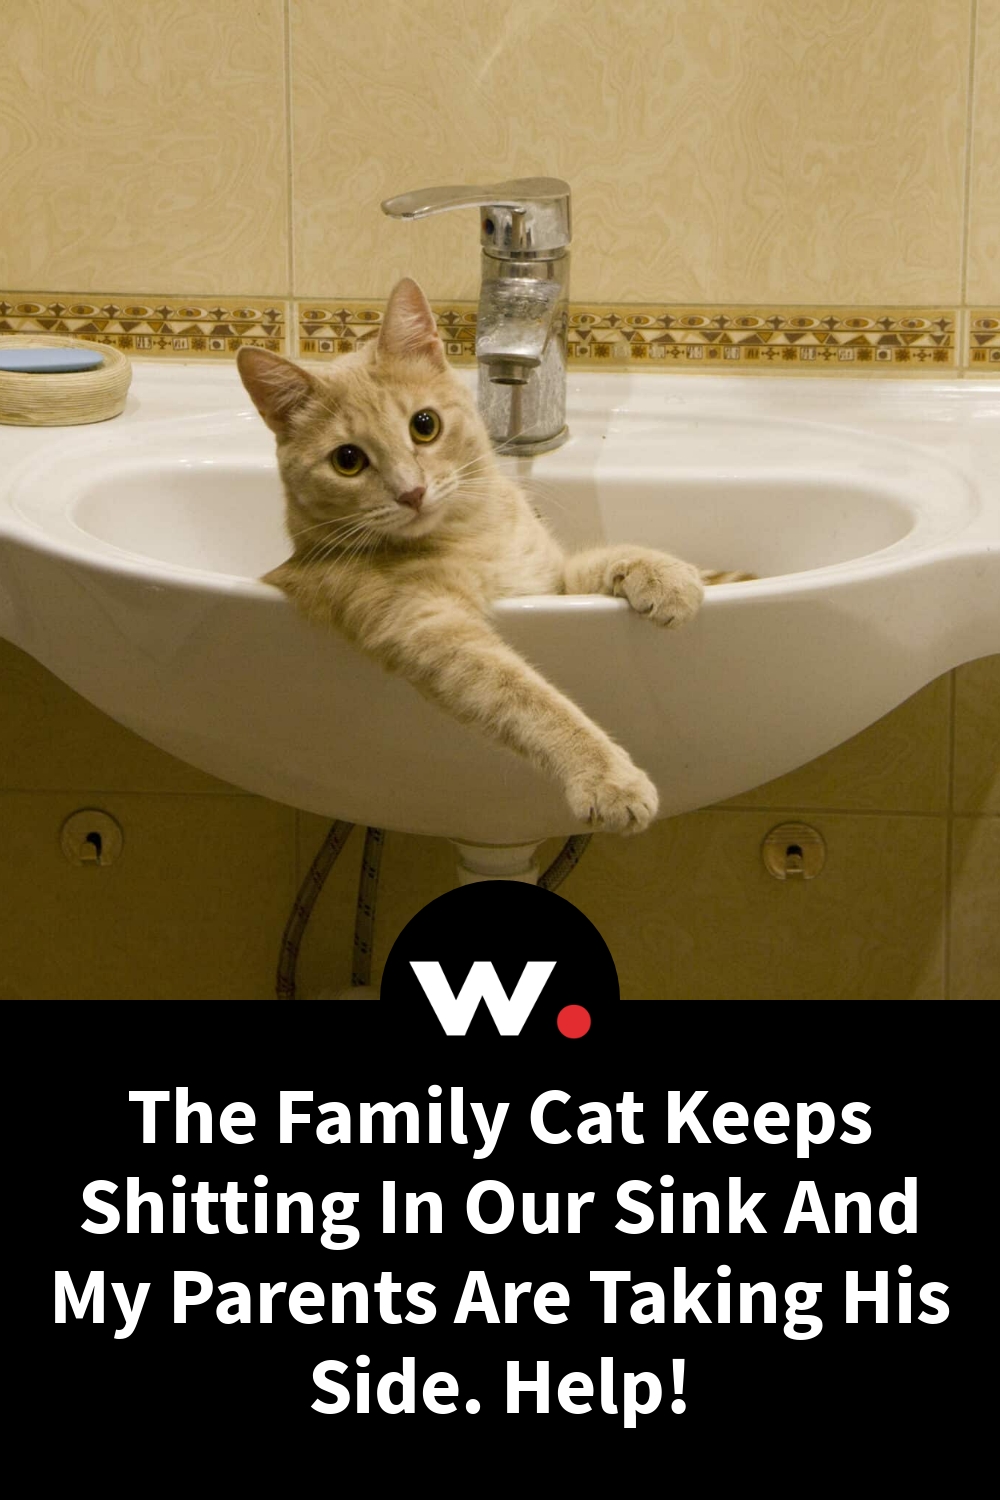 The Family Cat Keeps Shitting In Our Sink And My Parents Are Taking His Side. Help!